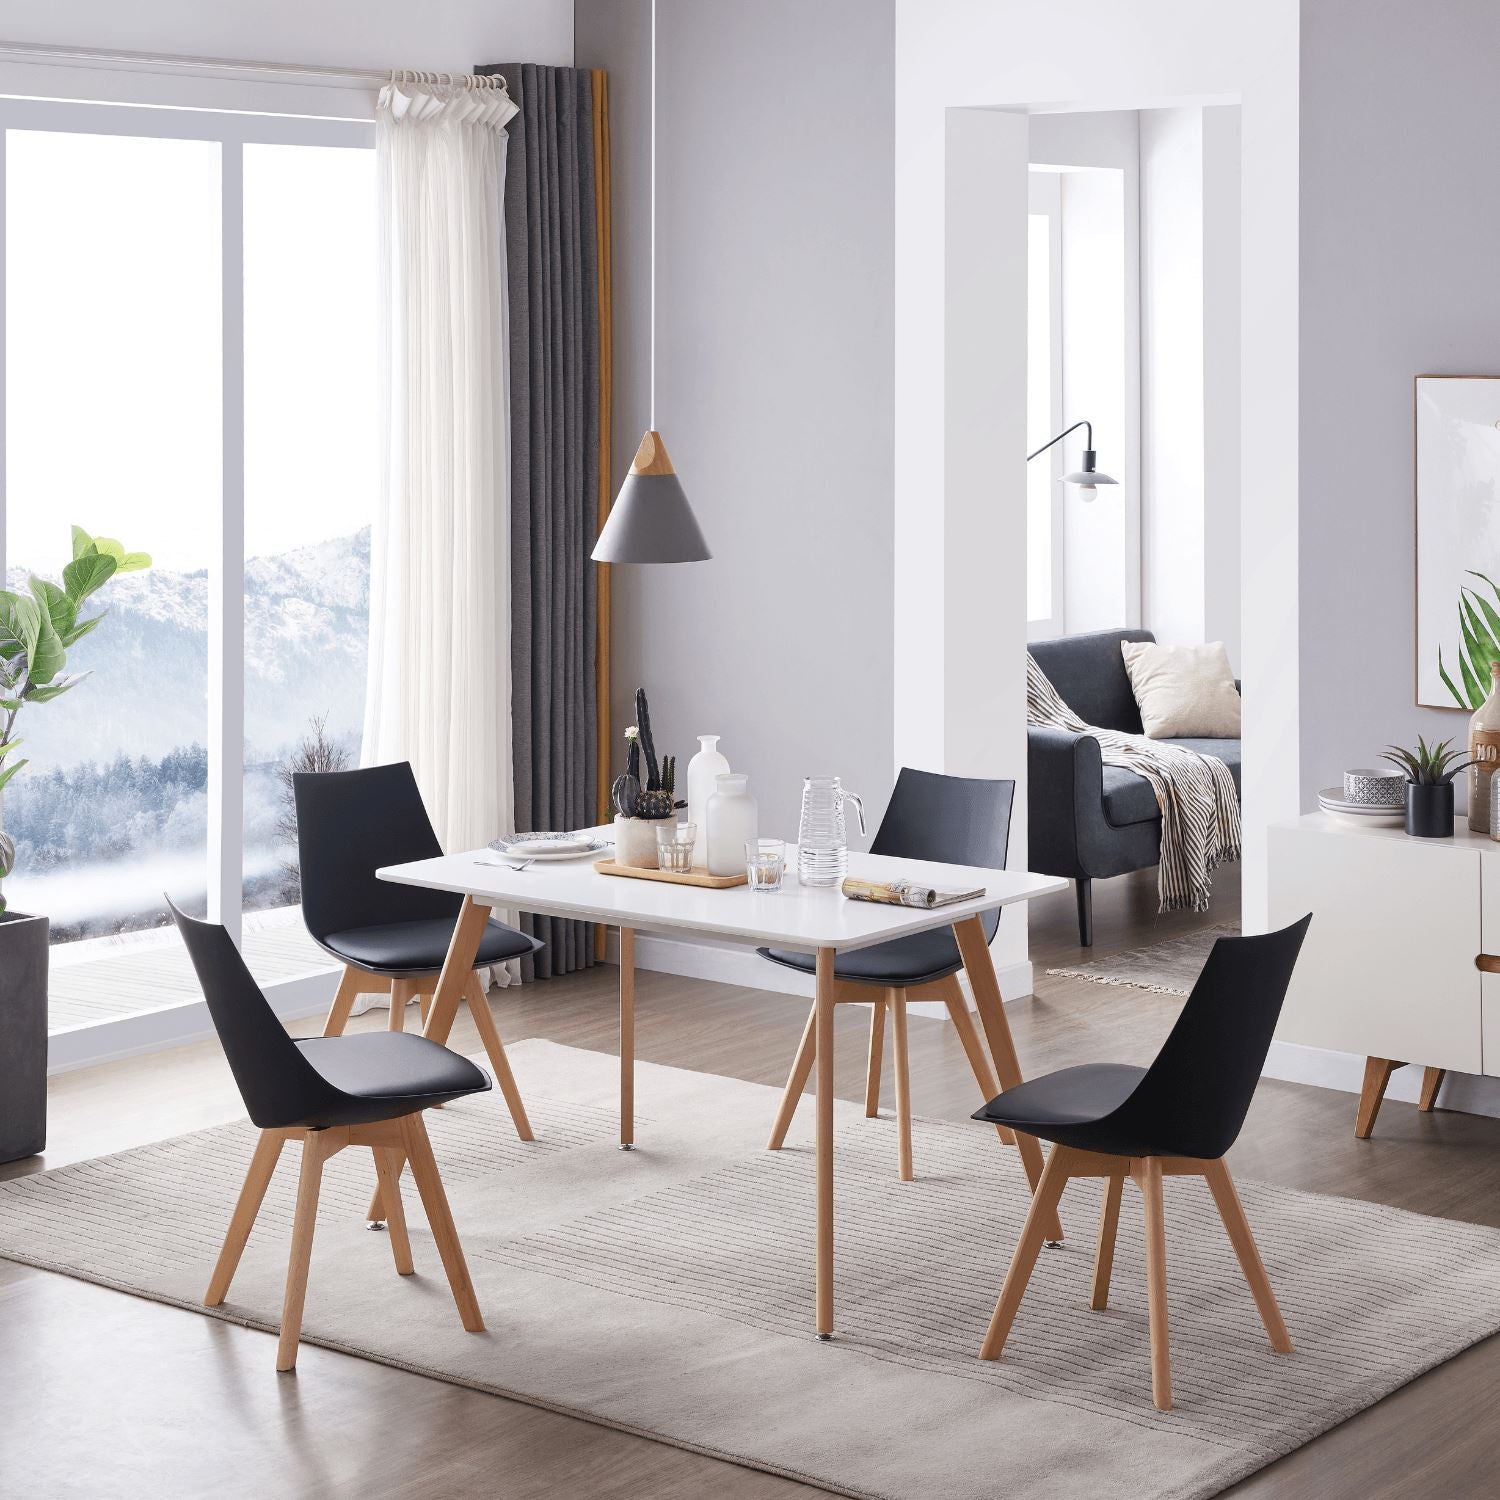 Swedish Dining Table - Valyou 